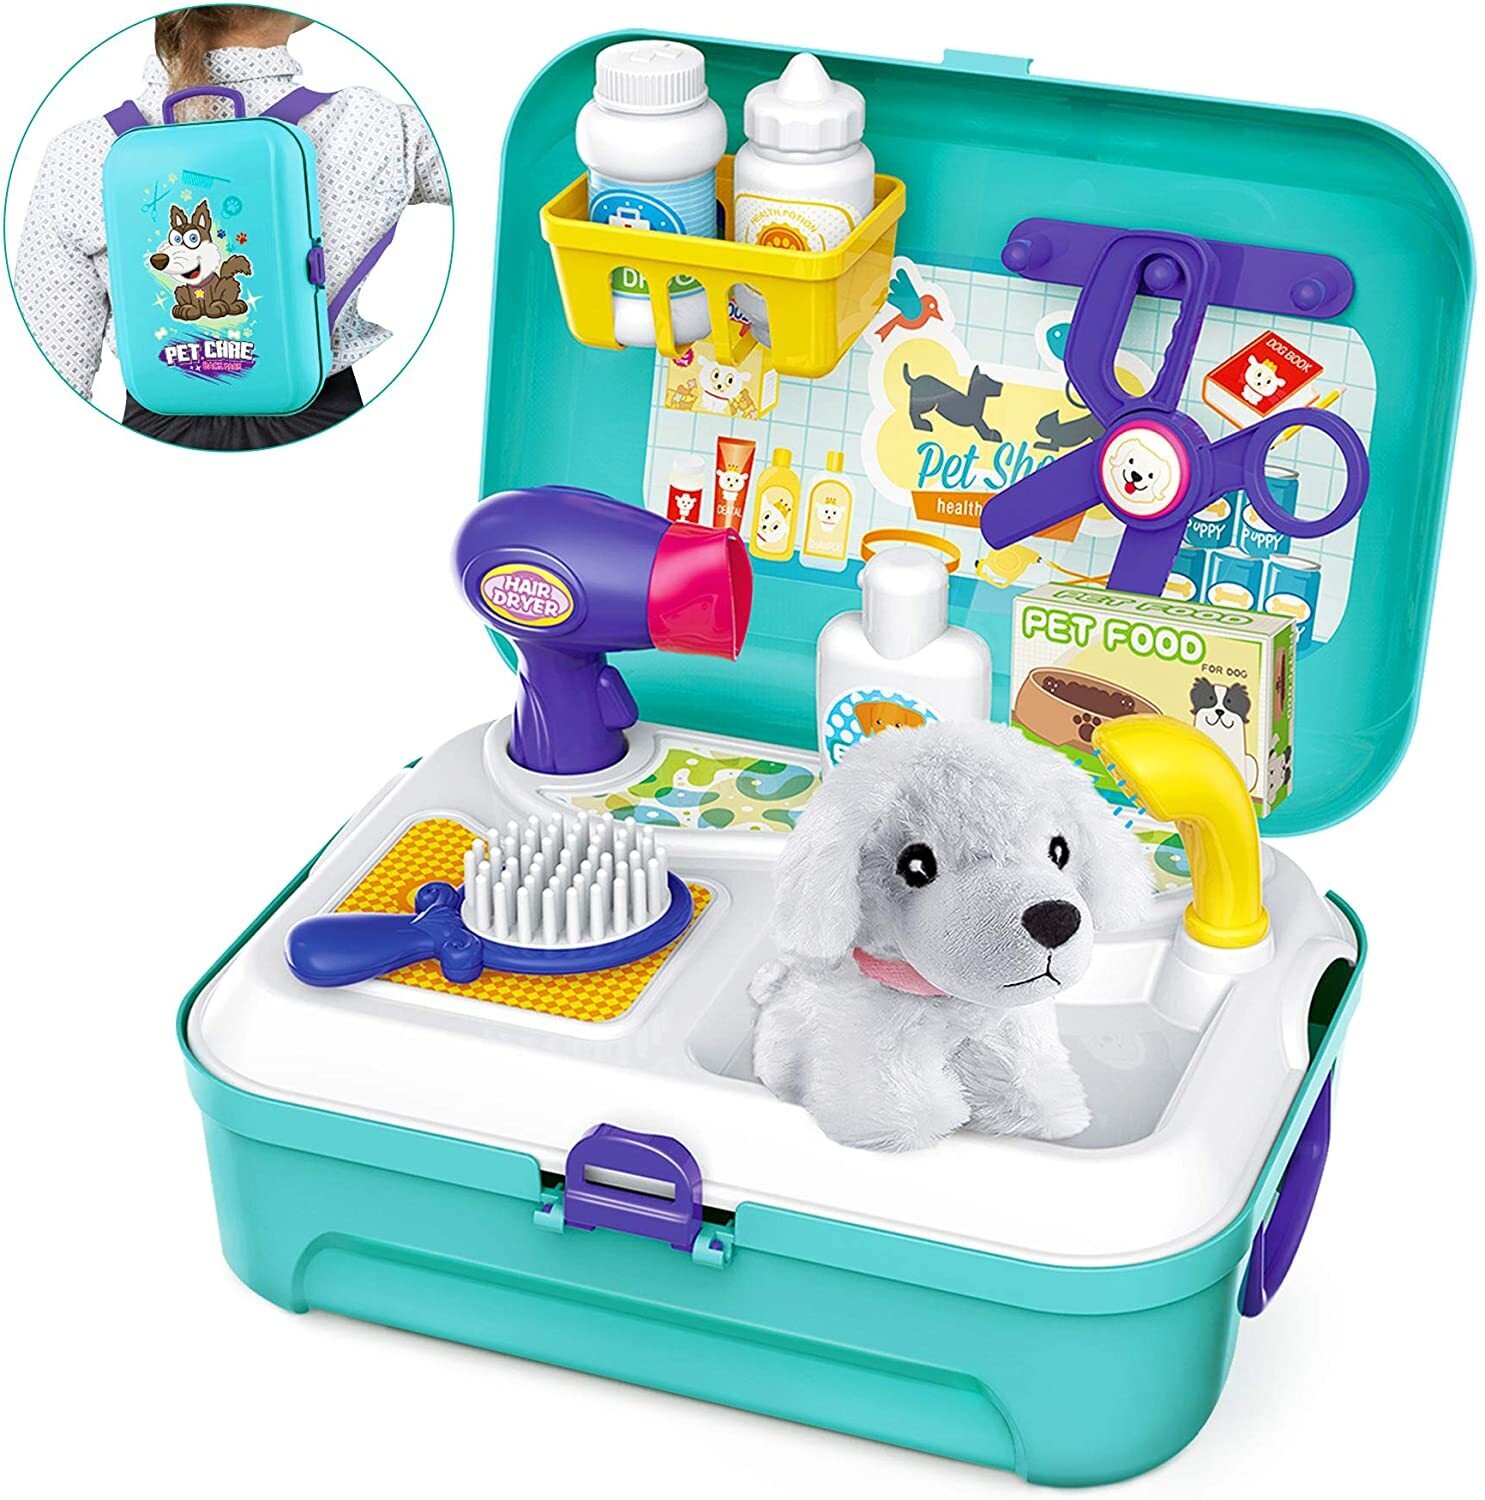 Pet Care Role Play Set Grooming Toys